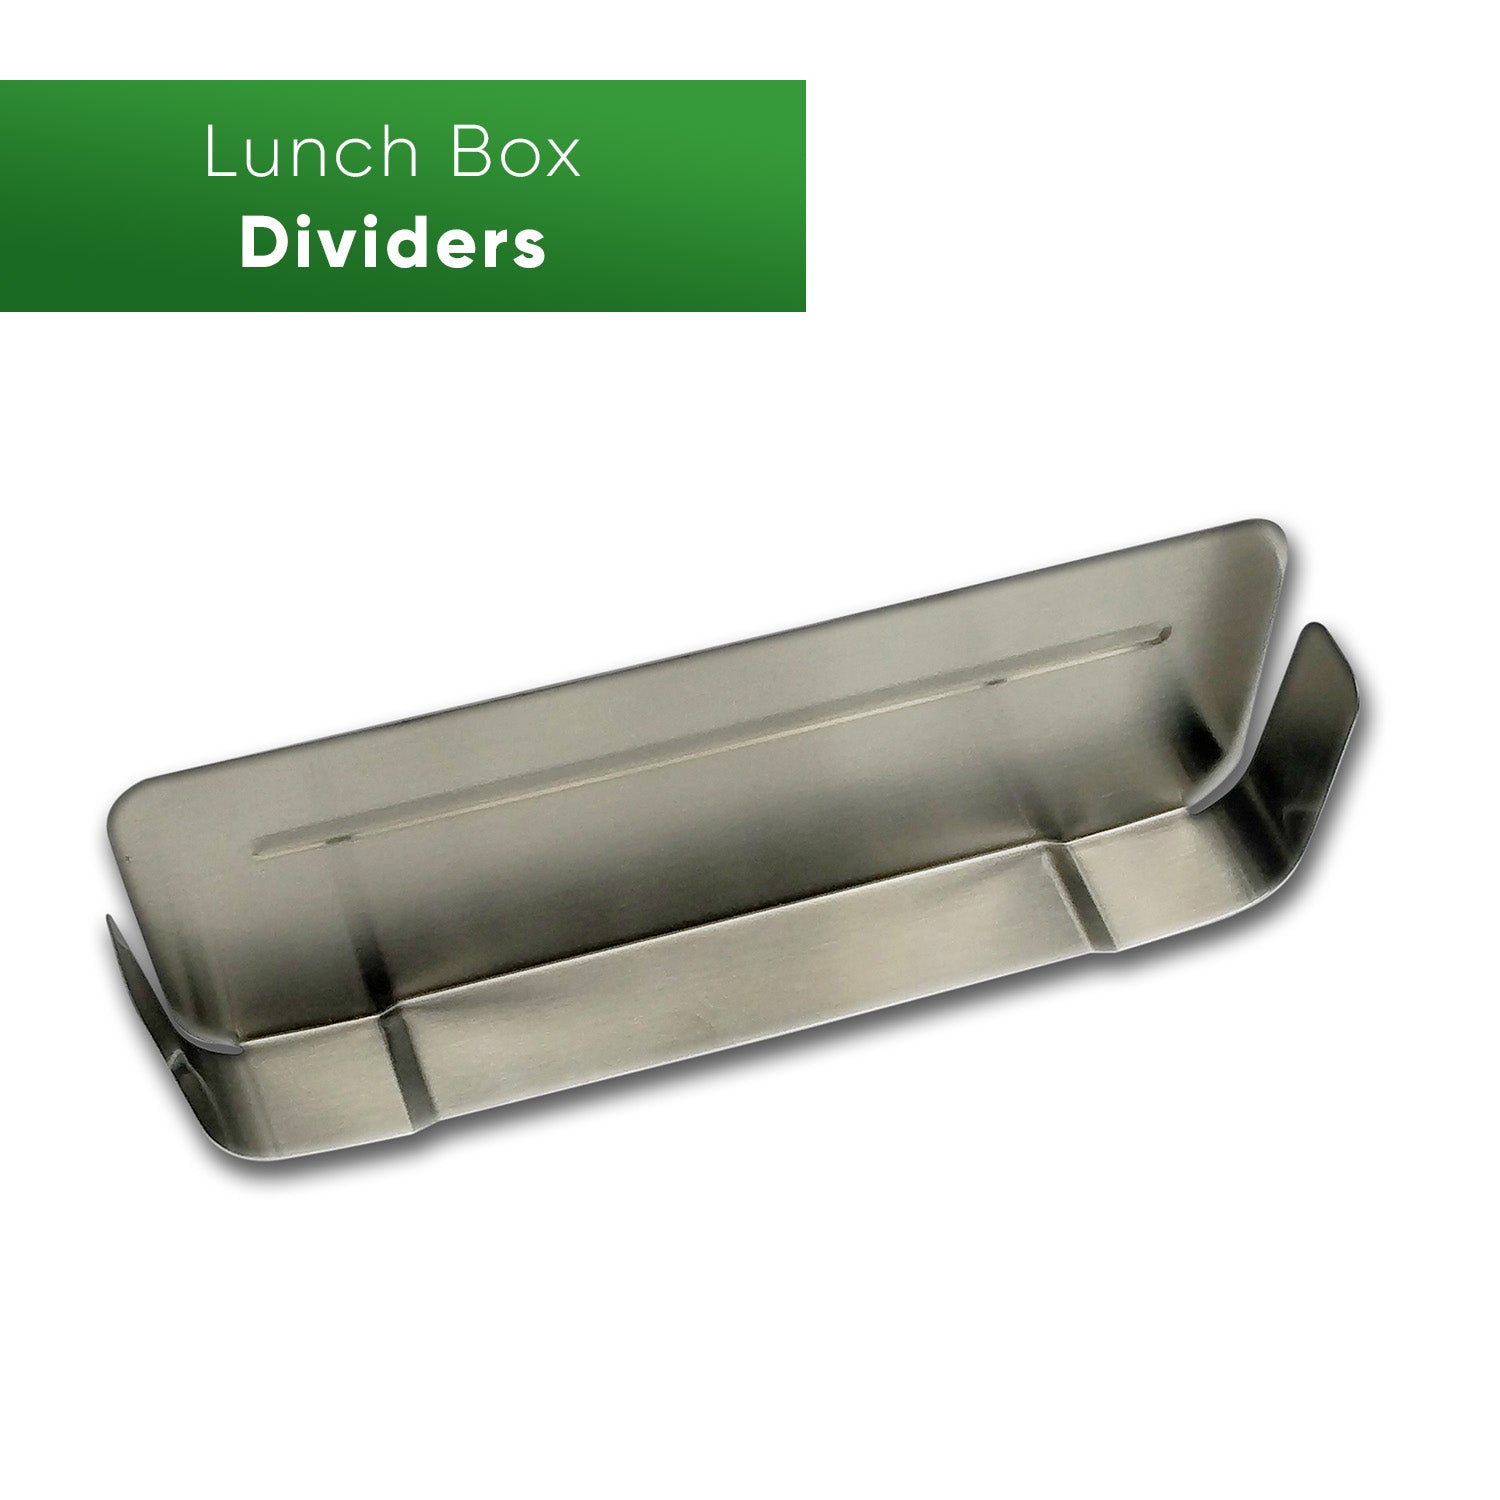 Stainless Steel Lunch Box - Dividers